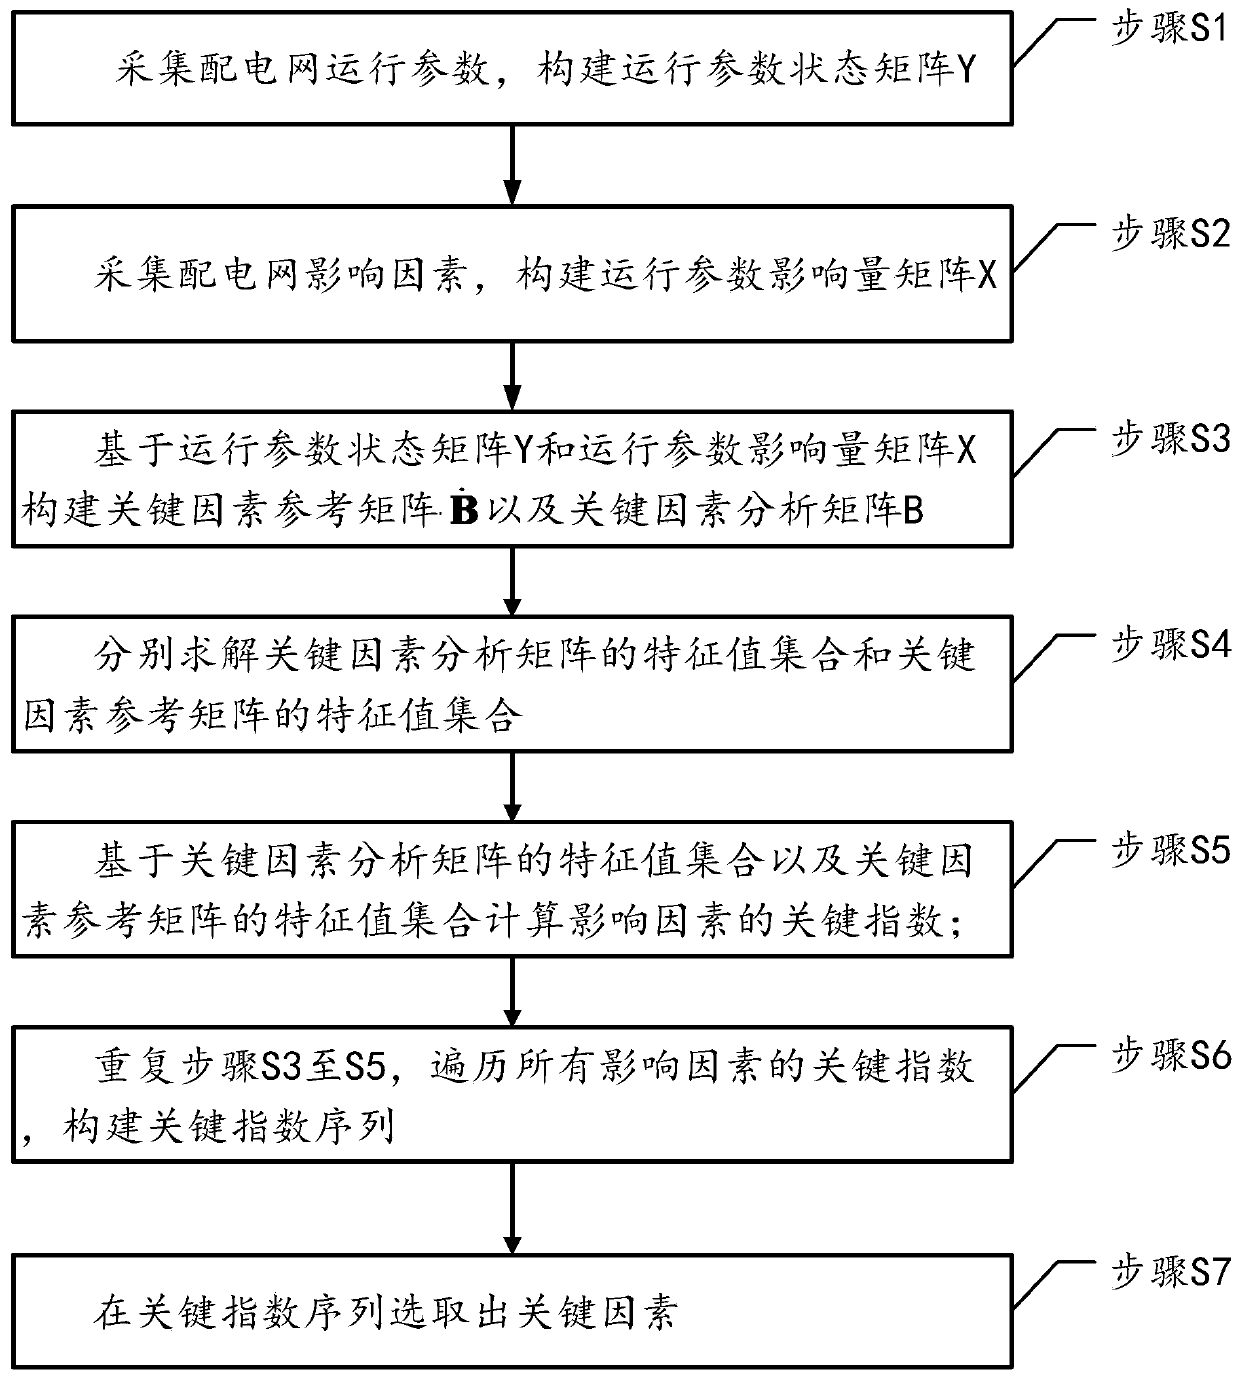 Power distribution network operation parameter key factor analysis method, system and device